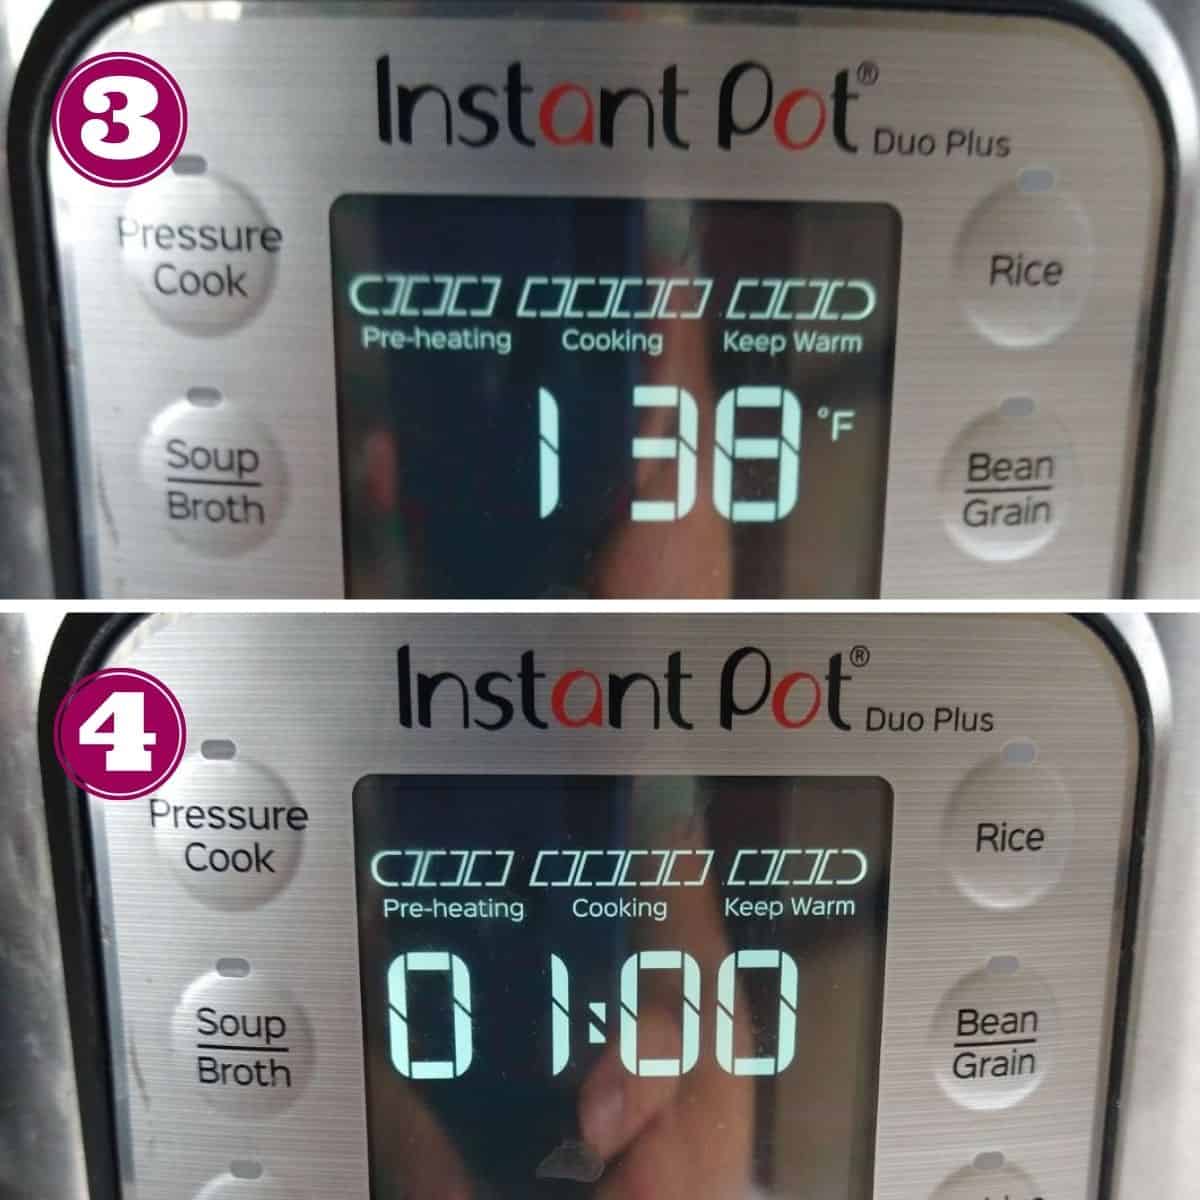 Step 3 shows the Instant Pot set to 138 degrees
Step 4 shows the Instant Pot set to 1 hour.